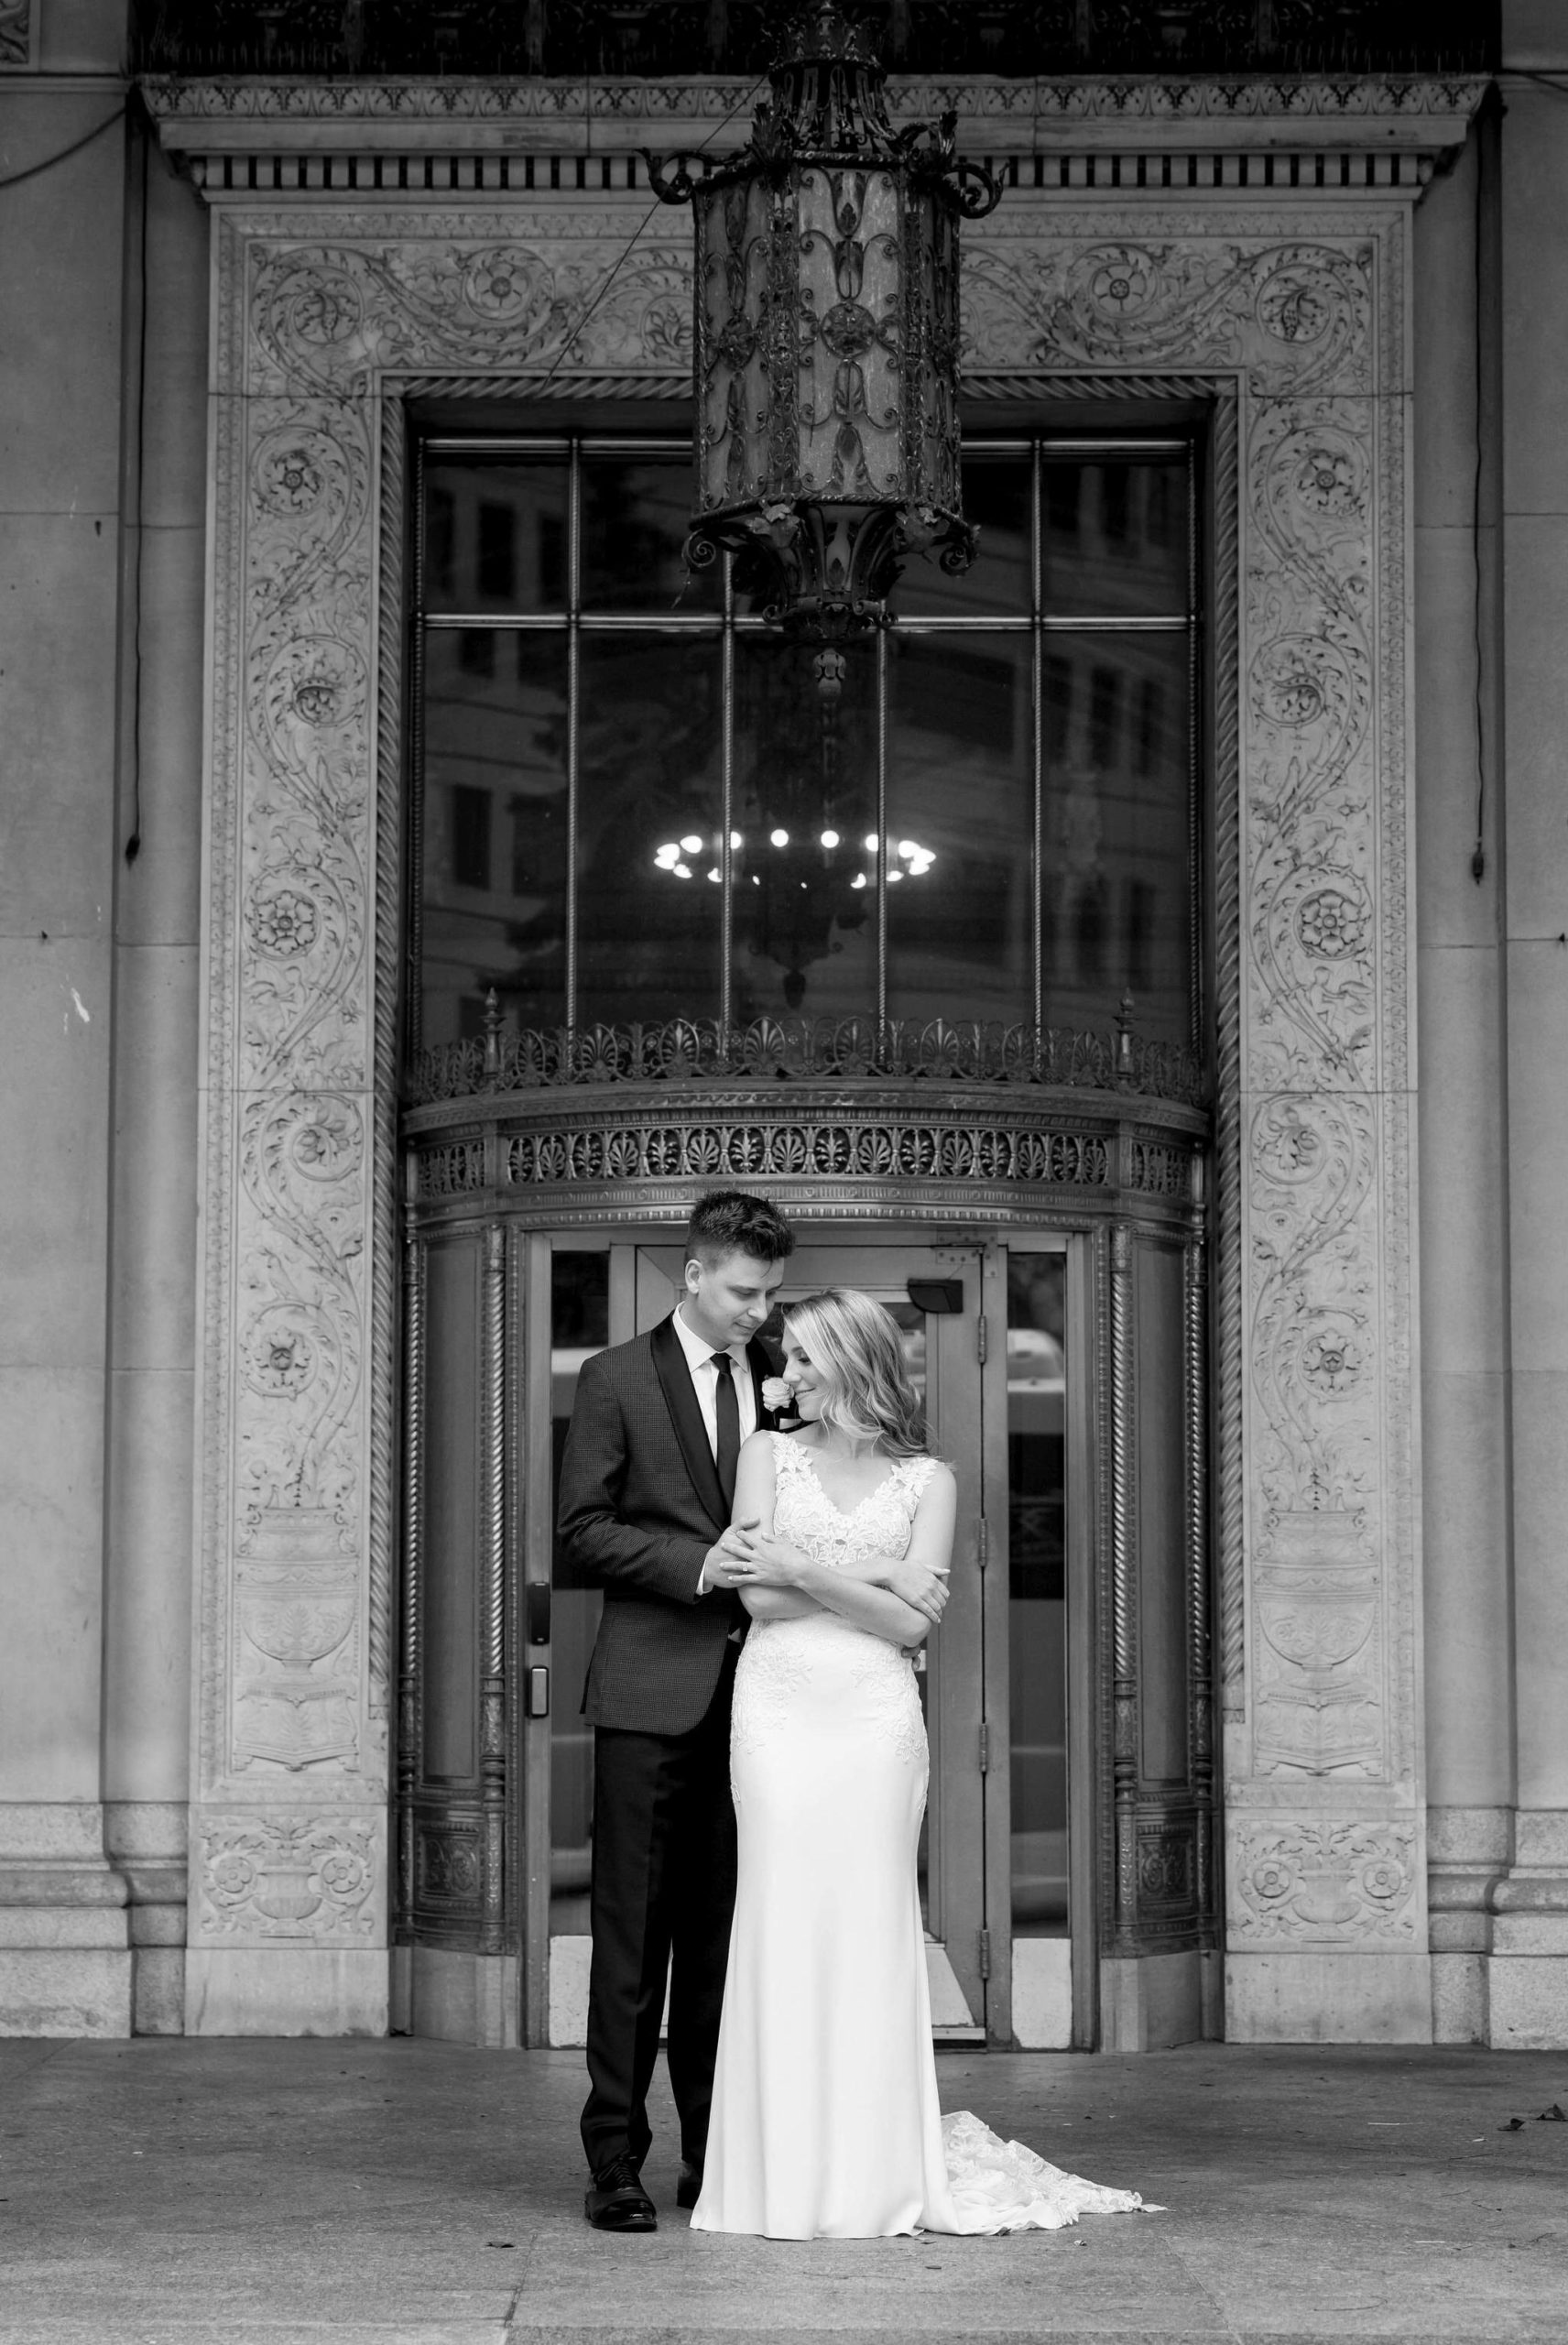 Newlyweds pose in front of a brass doorway at the Cadillac Place apartments.  